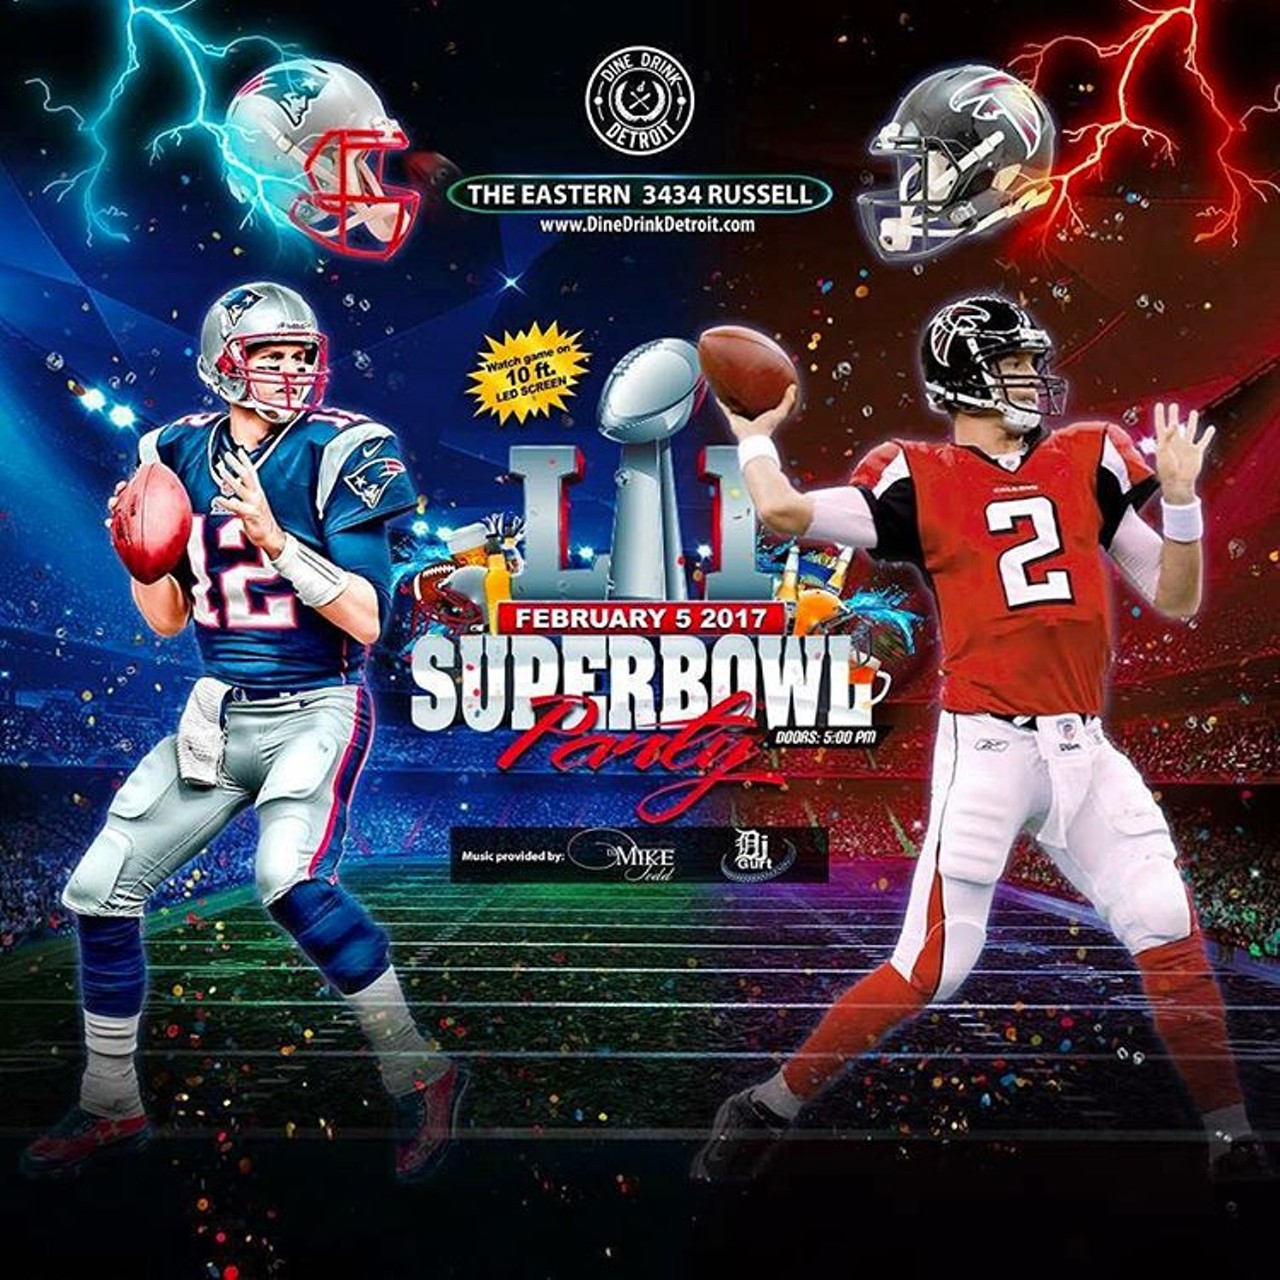 The Eastern -
Detroit's biggest Super Bowl party returns to Eastern Market. Watch the game on a 10-foot LED screen with a full bar, DJs, photo booth, and halftime buffet. Doors open at 5 p.m., and the party continues after the game.
3434 Russell St., Detroit; 313-574-4202; dinedrinkdetroit.com; Photo